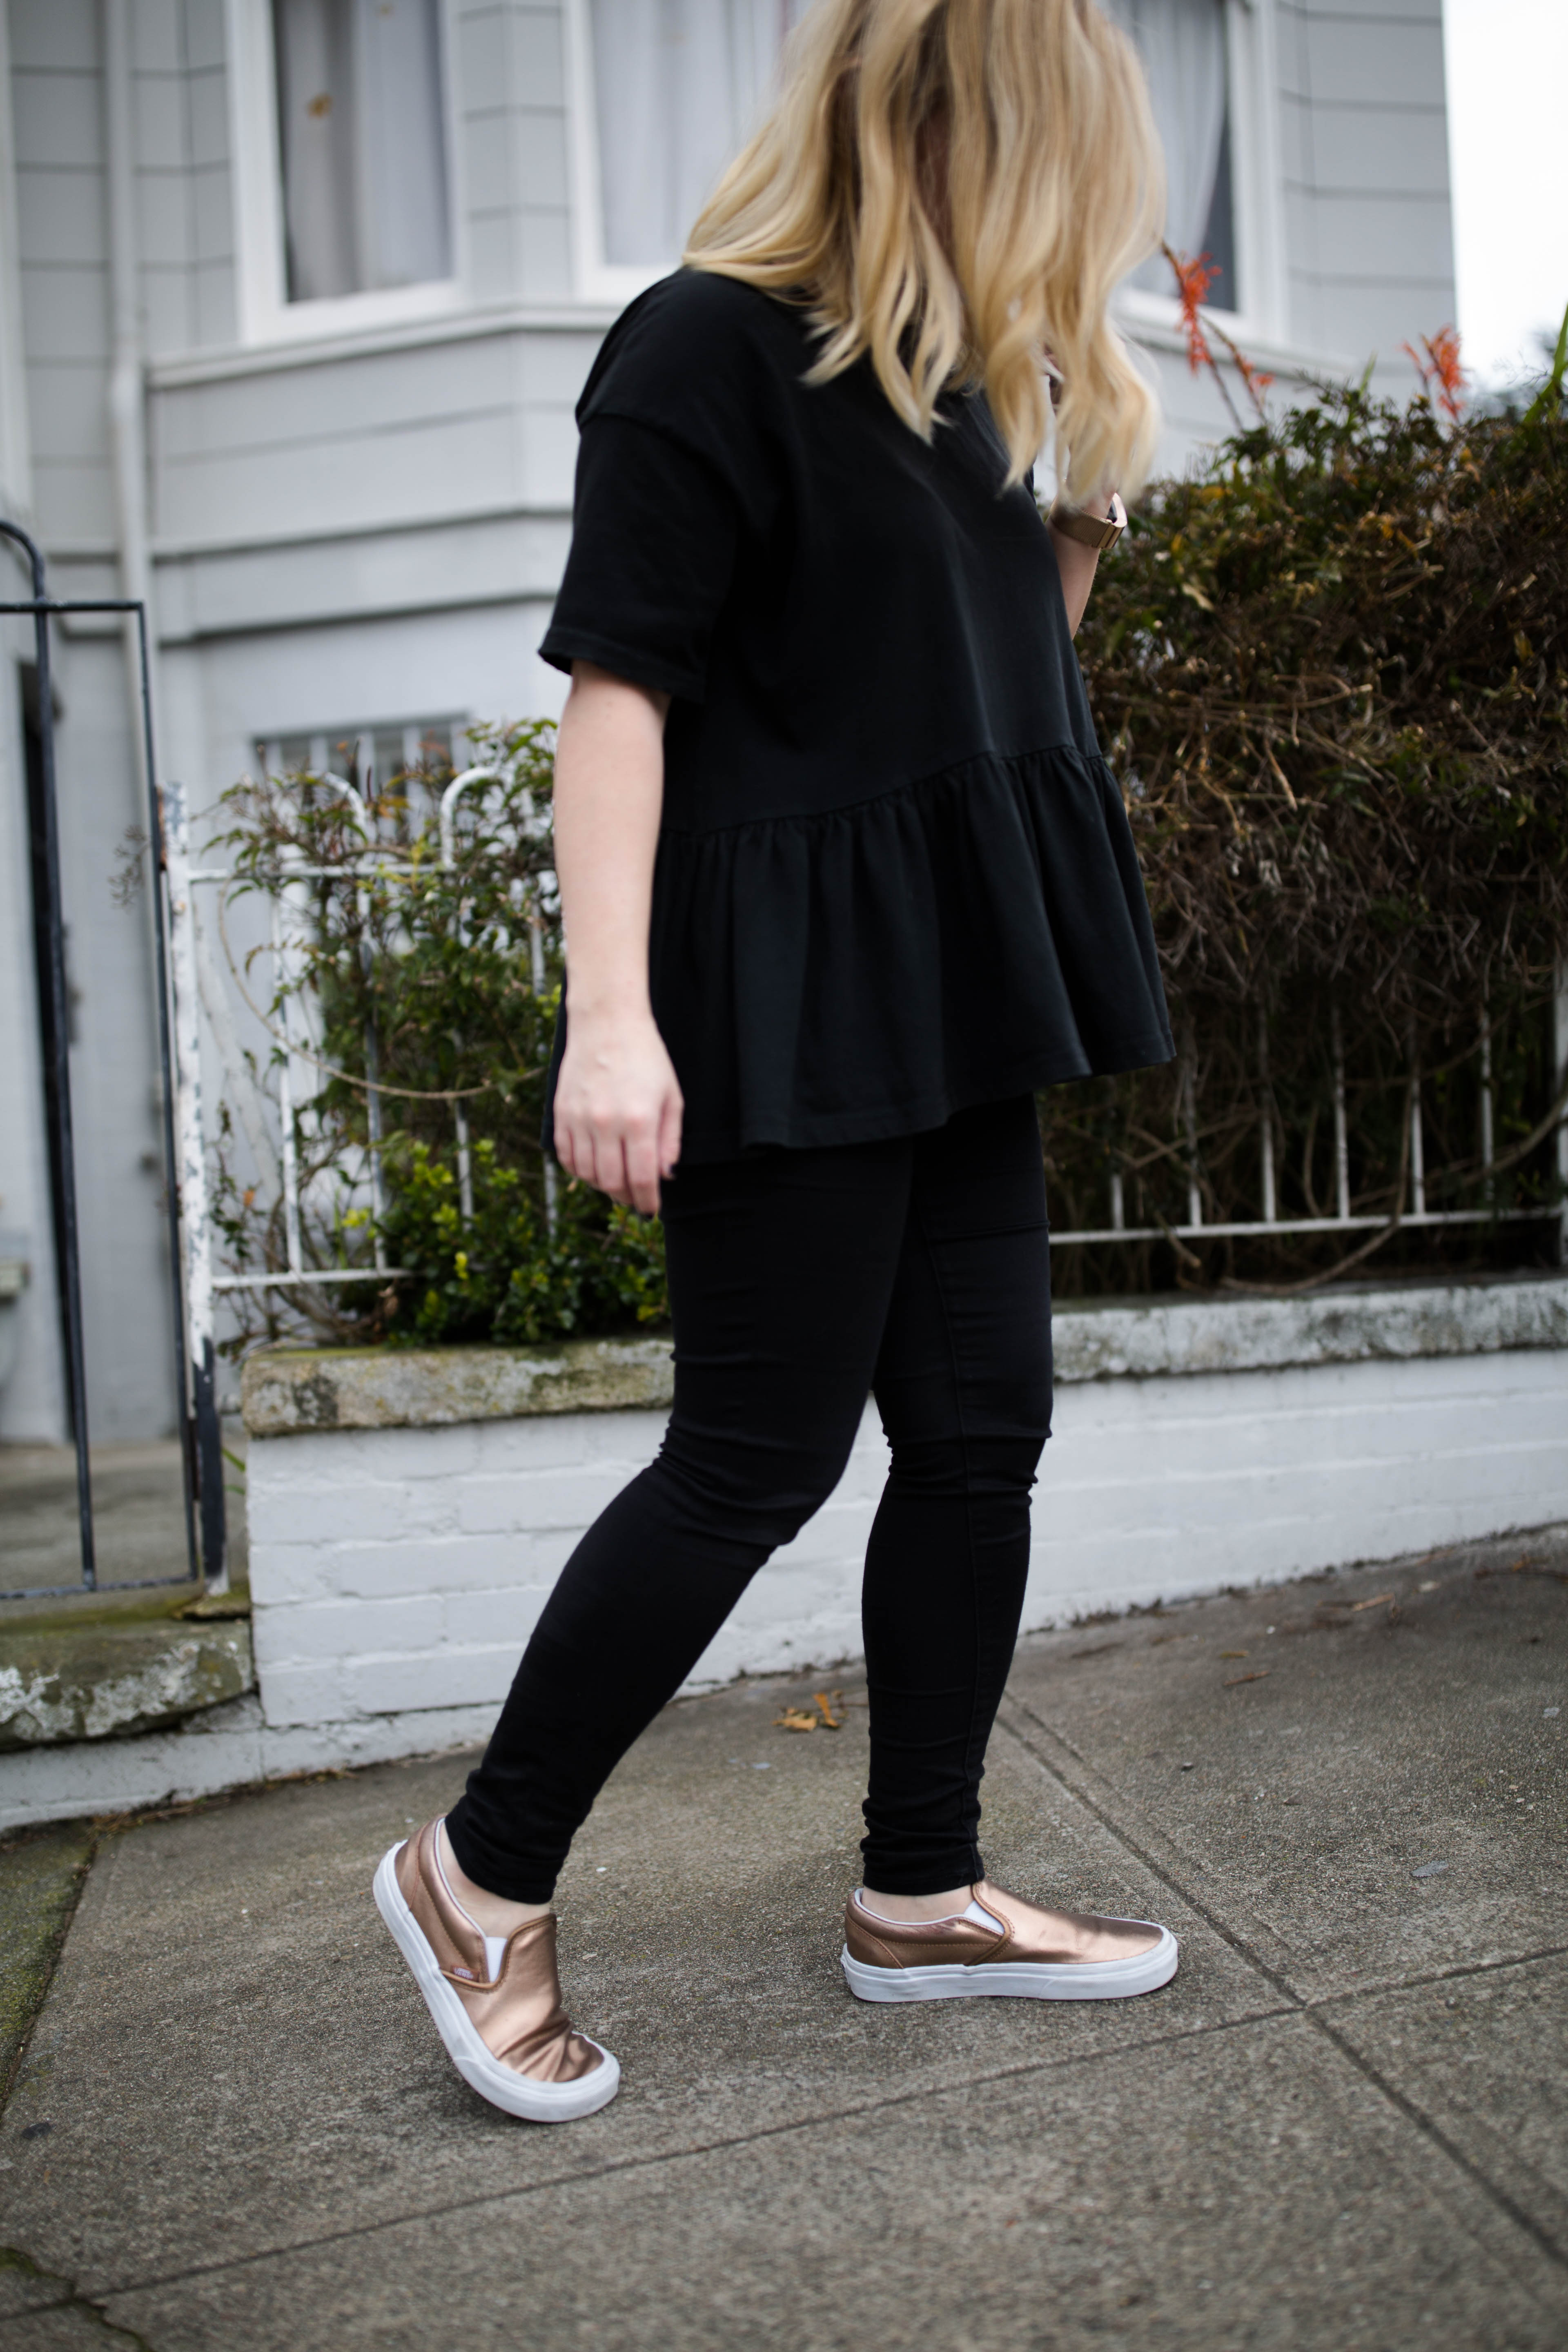 Learn how to style an all black outfit!